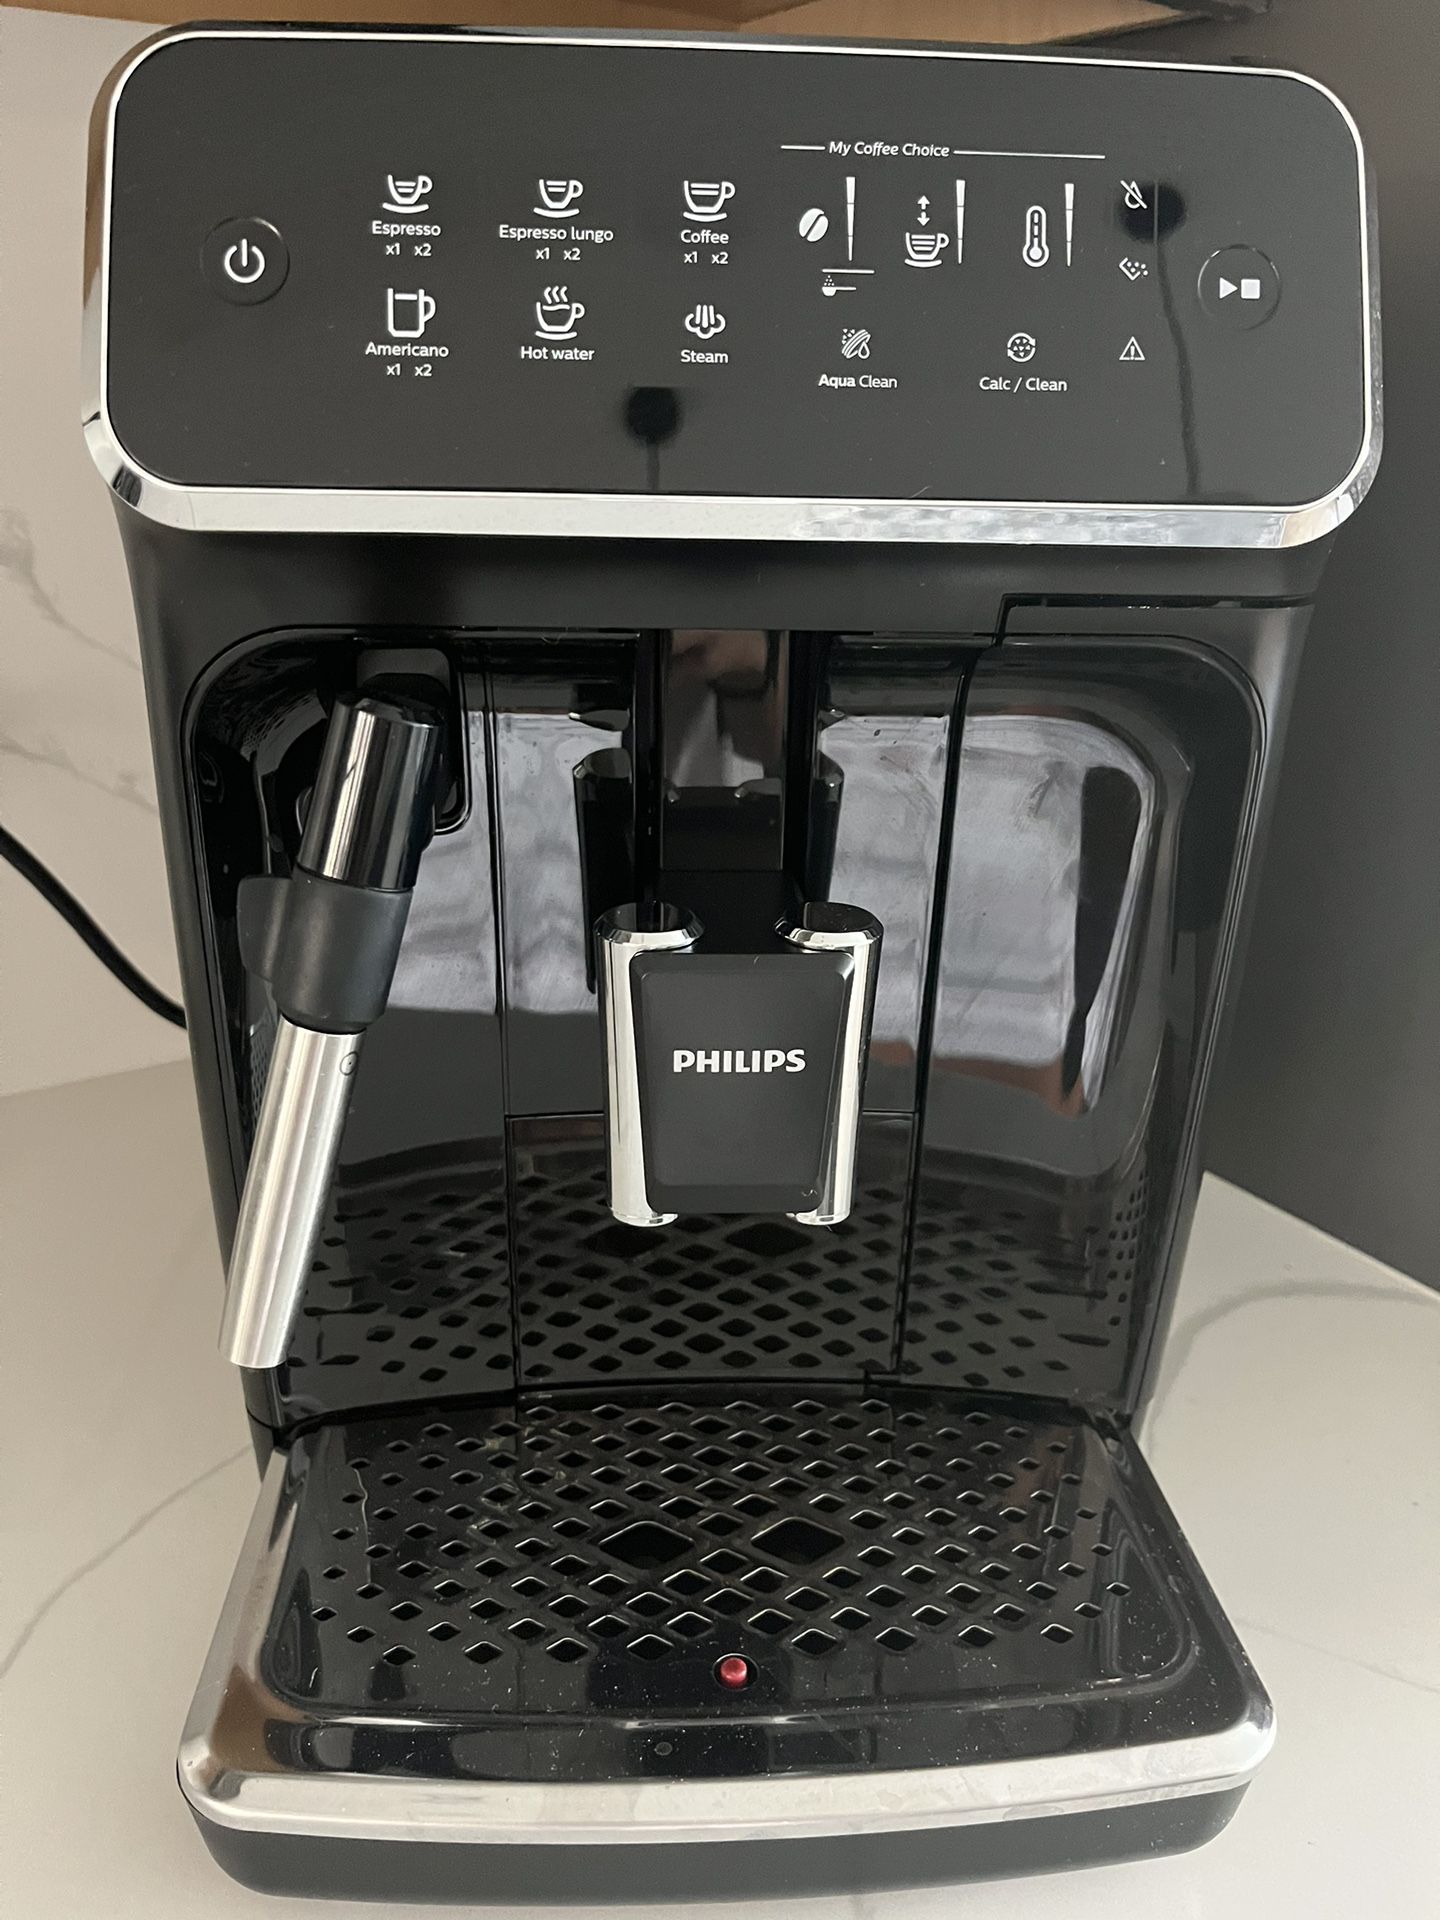 Philips 3200 Series Fully Automatic Espresso Machine w/ Milk Frother - Black 